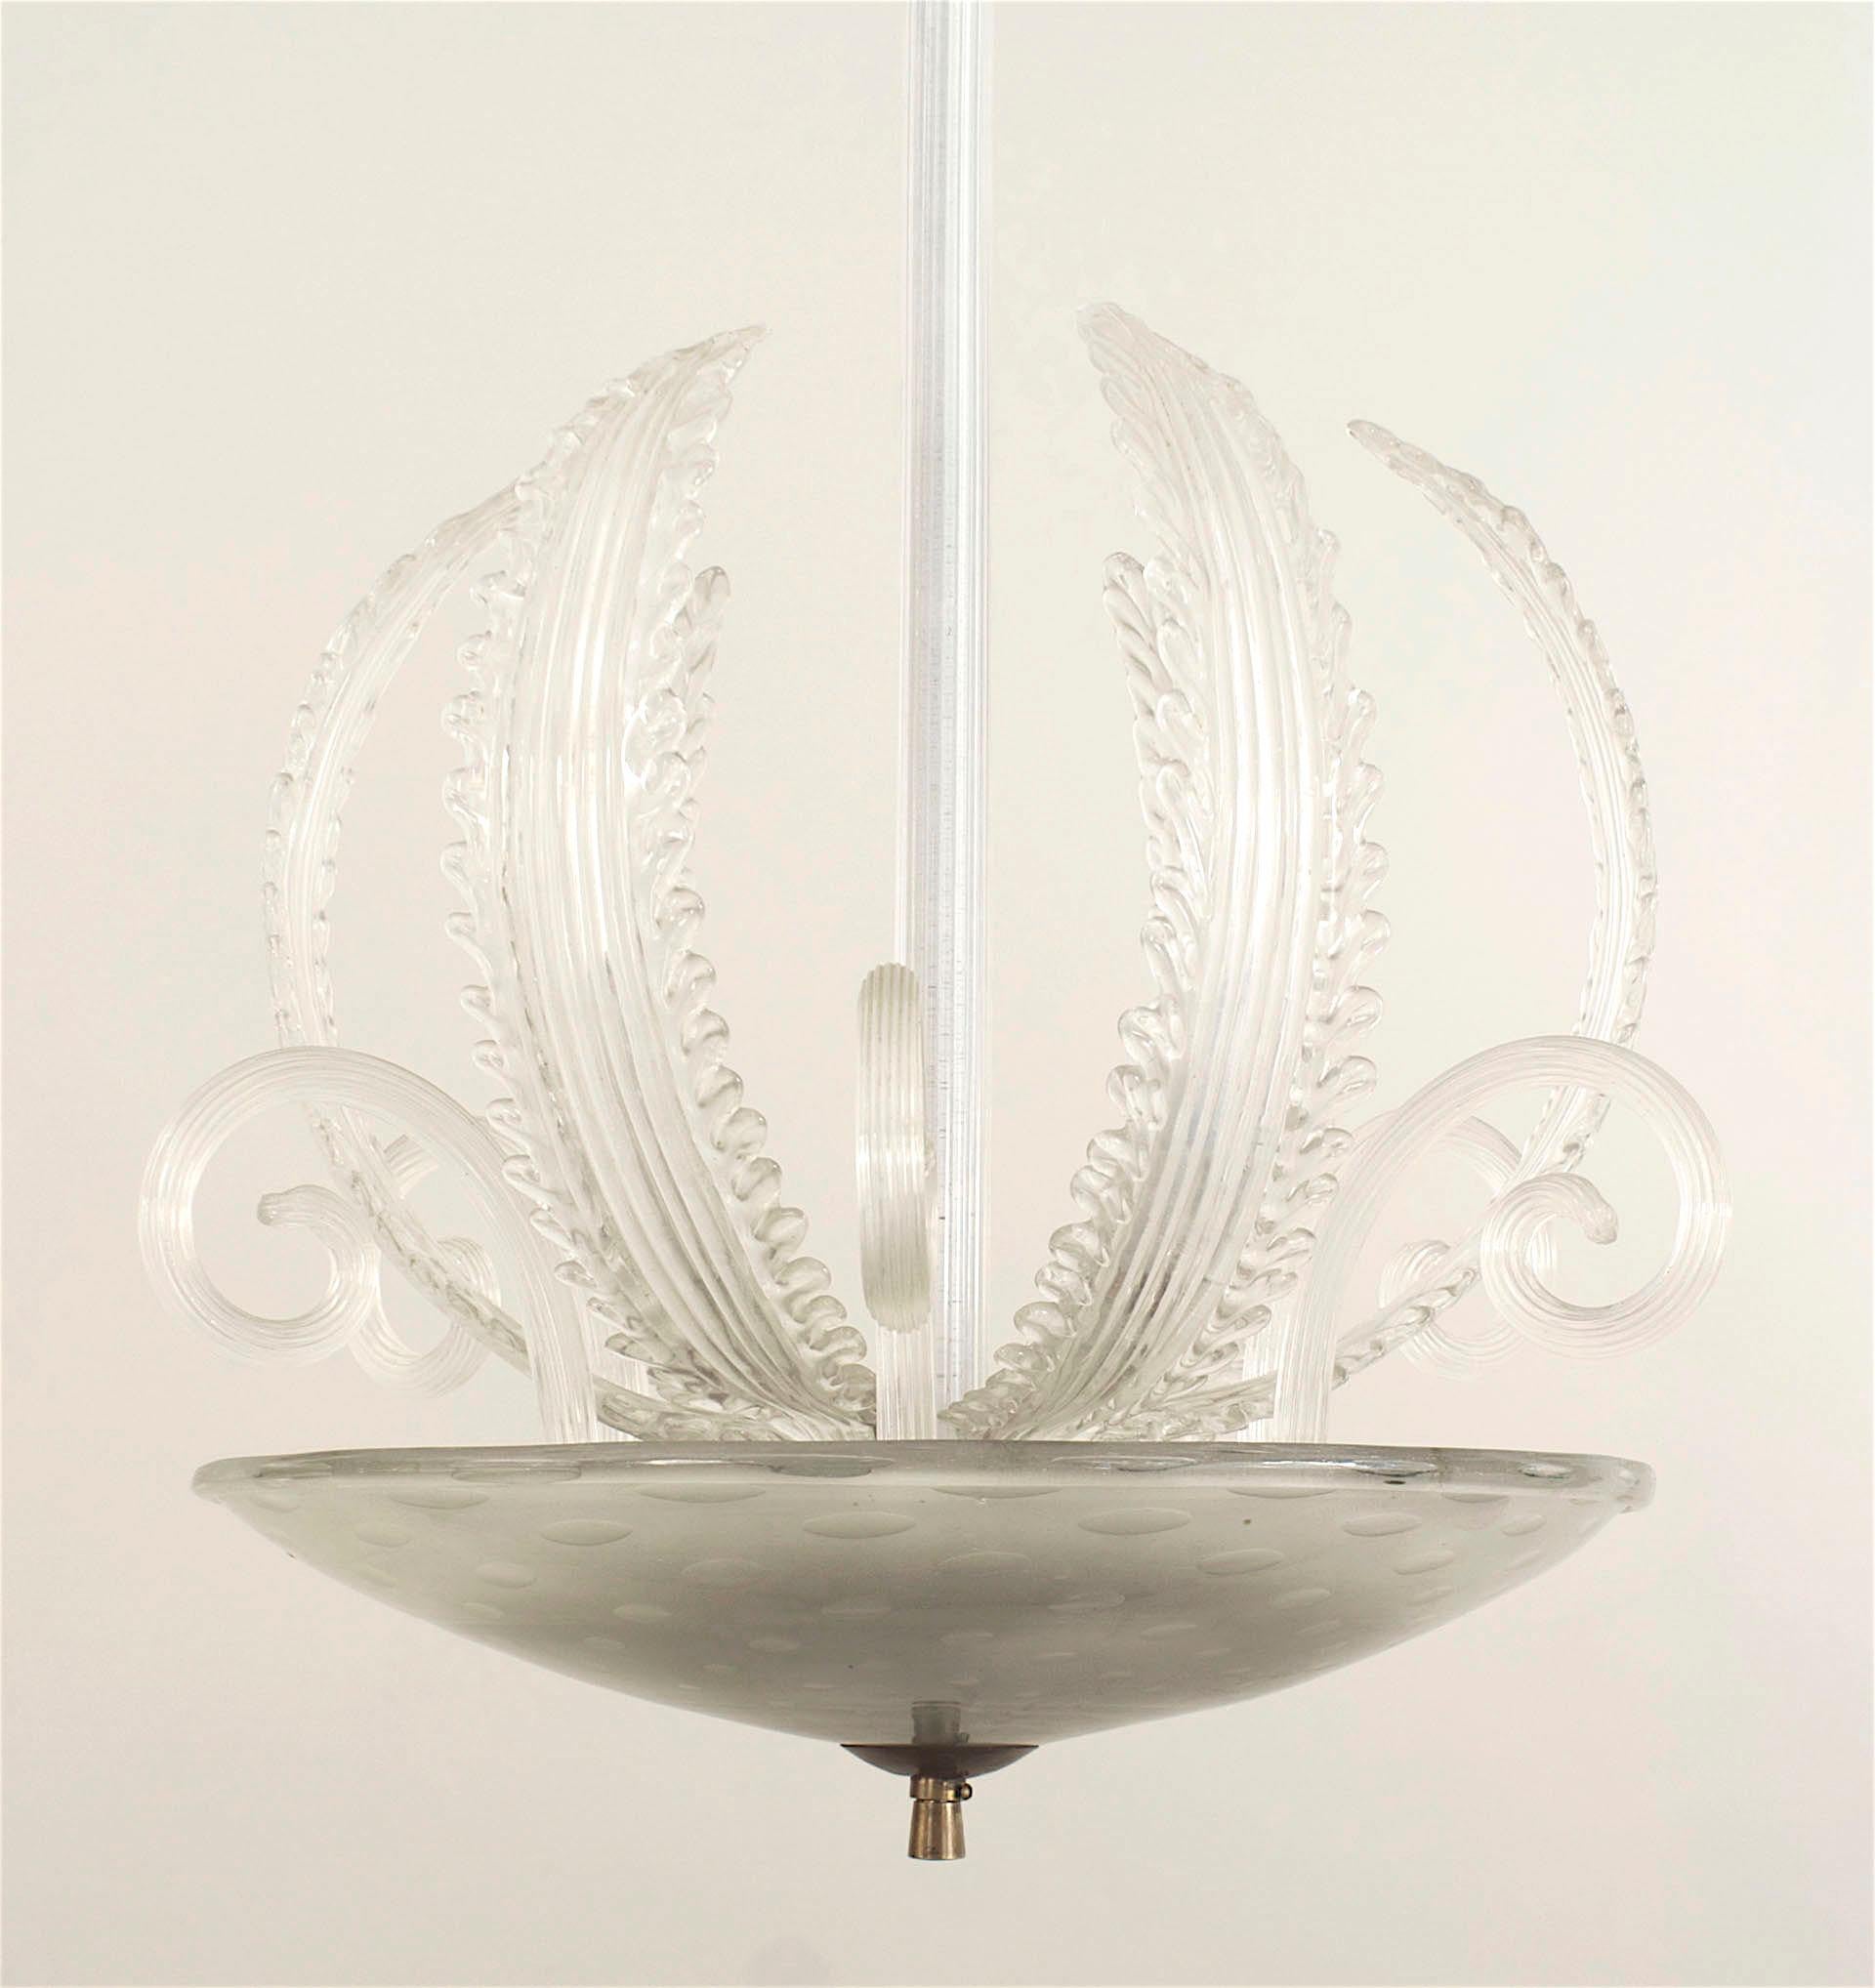 Italian Murano (1940s) frosted glass bowl form shade and canopy with dot design and protruding scrolls & feathers and suspended by a fluted center post. (BAROVIER ET TOSO)
